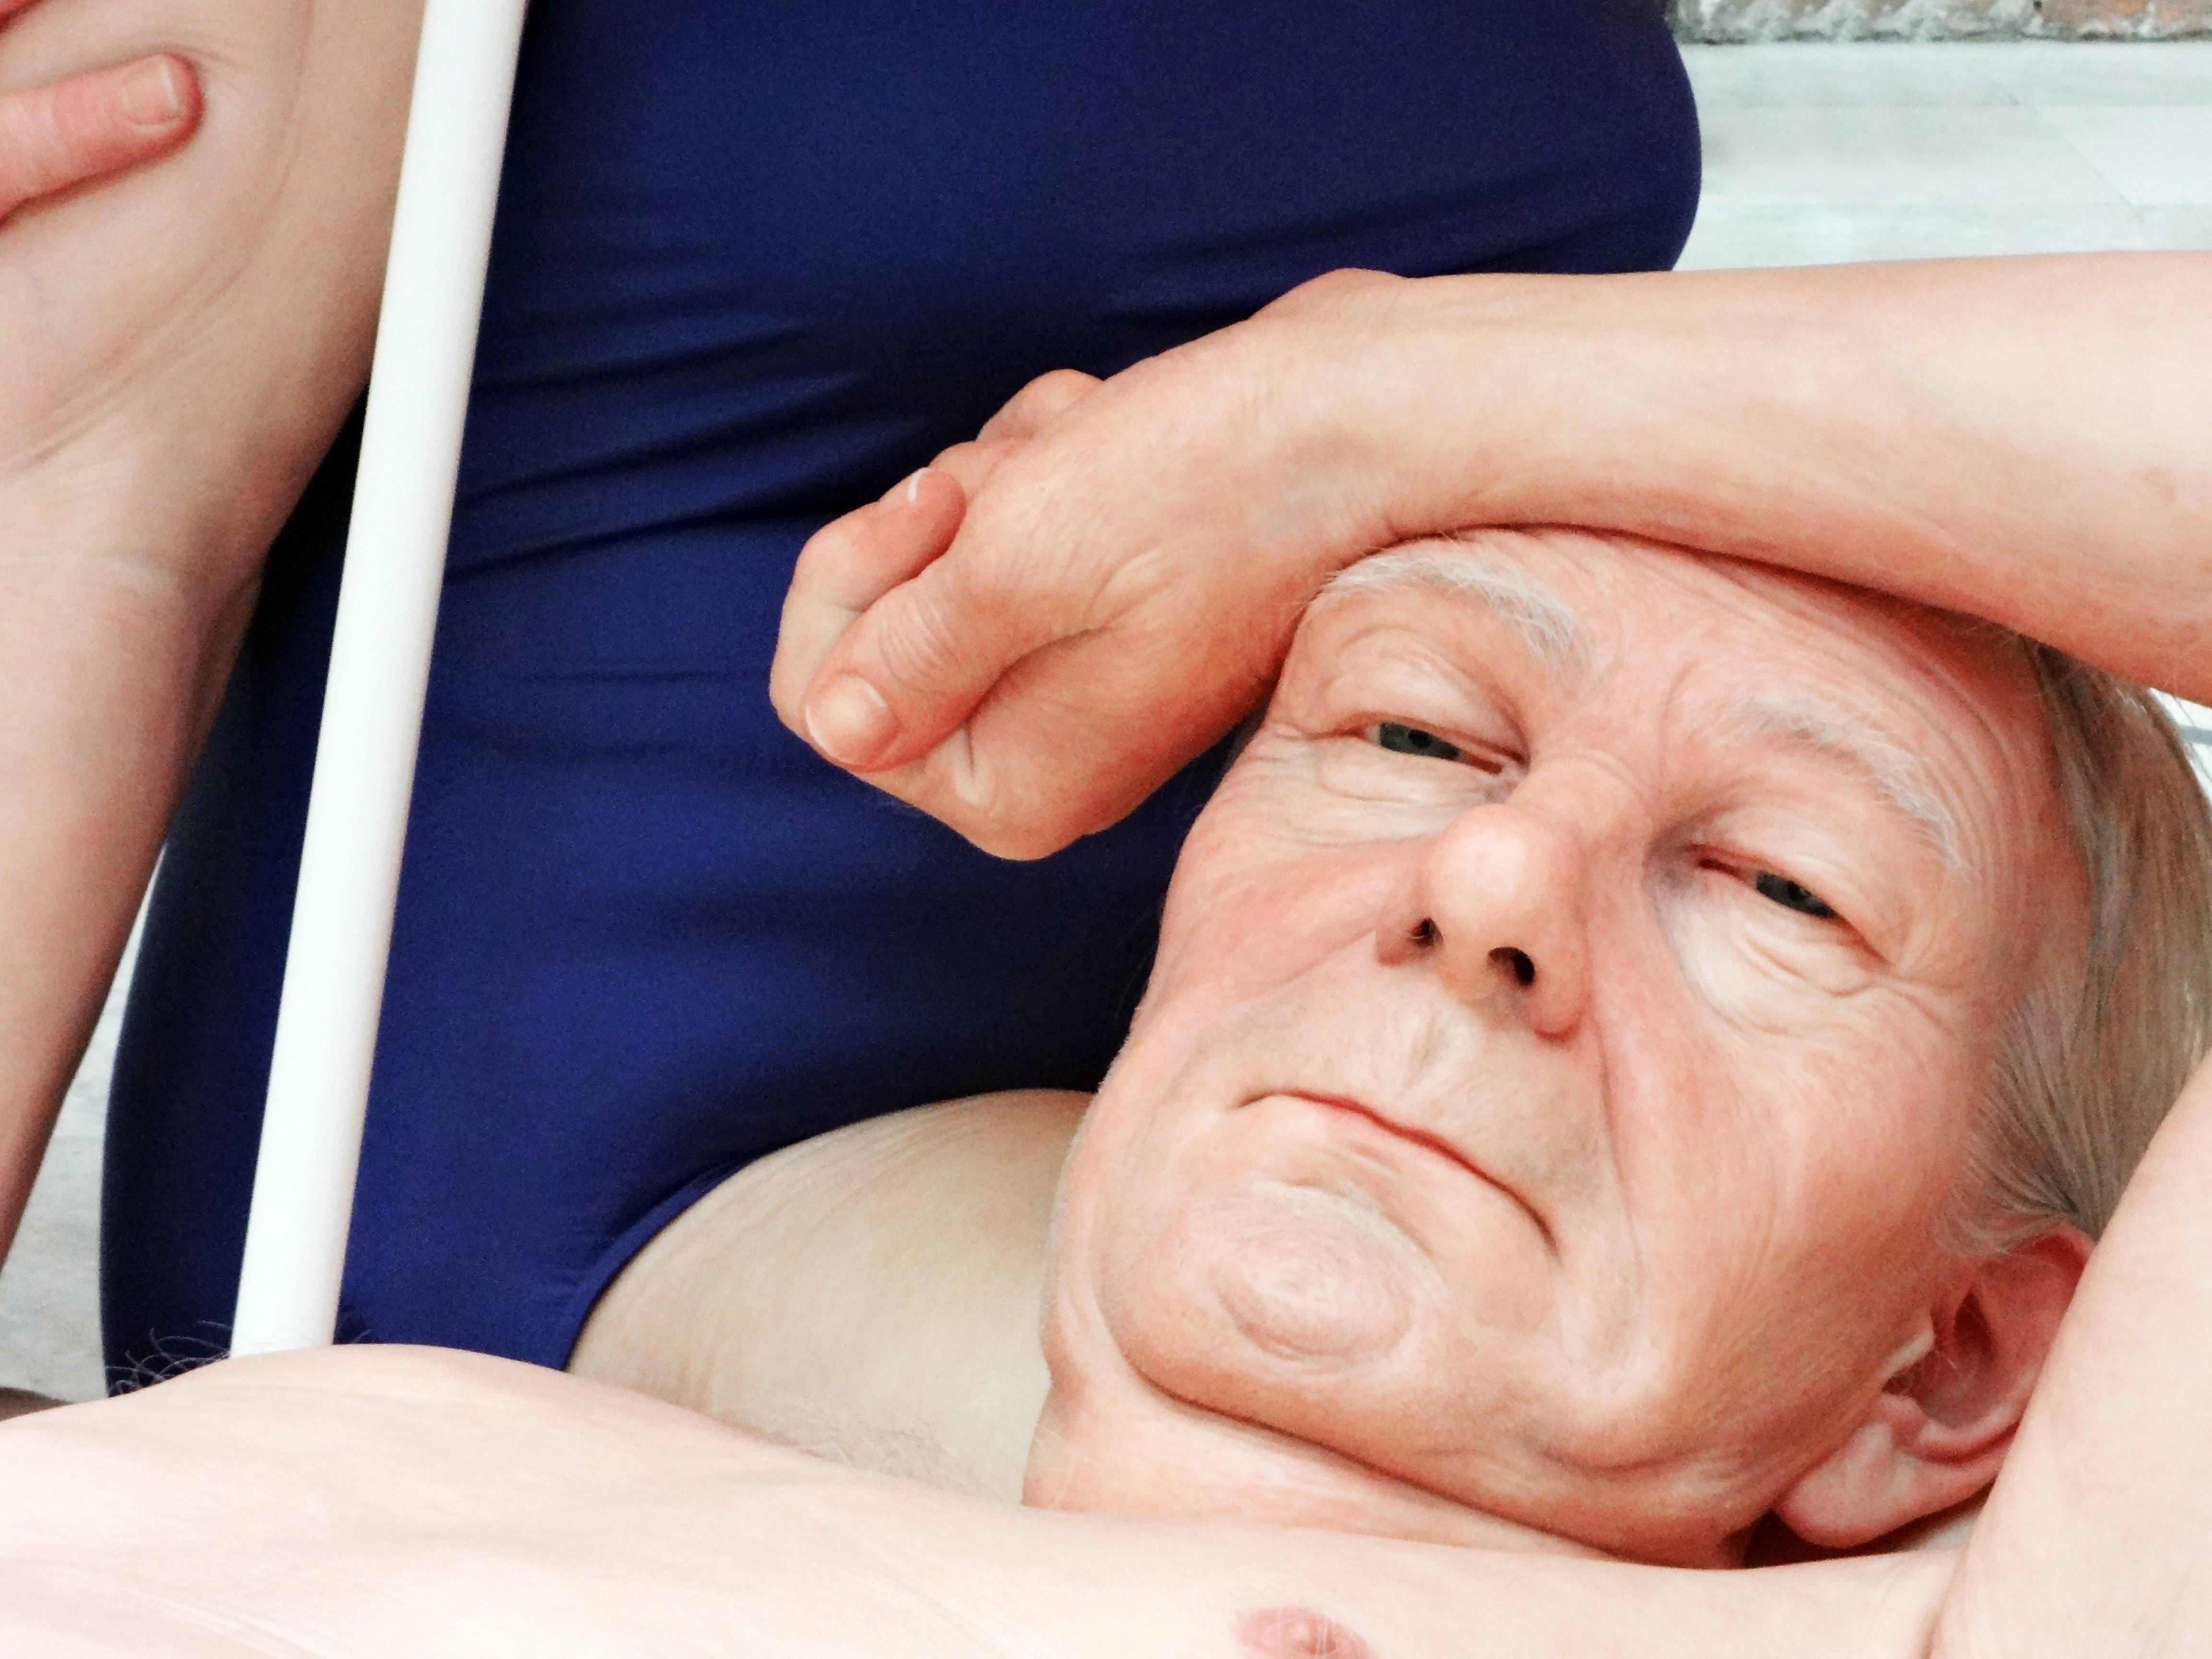 The Hyper-Realistic Sculptures Of Ron Mueck